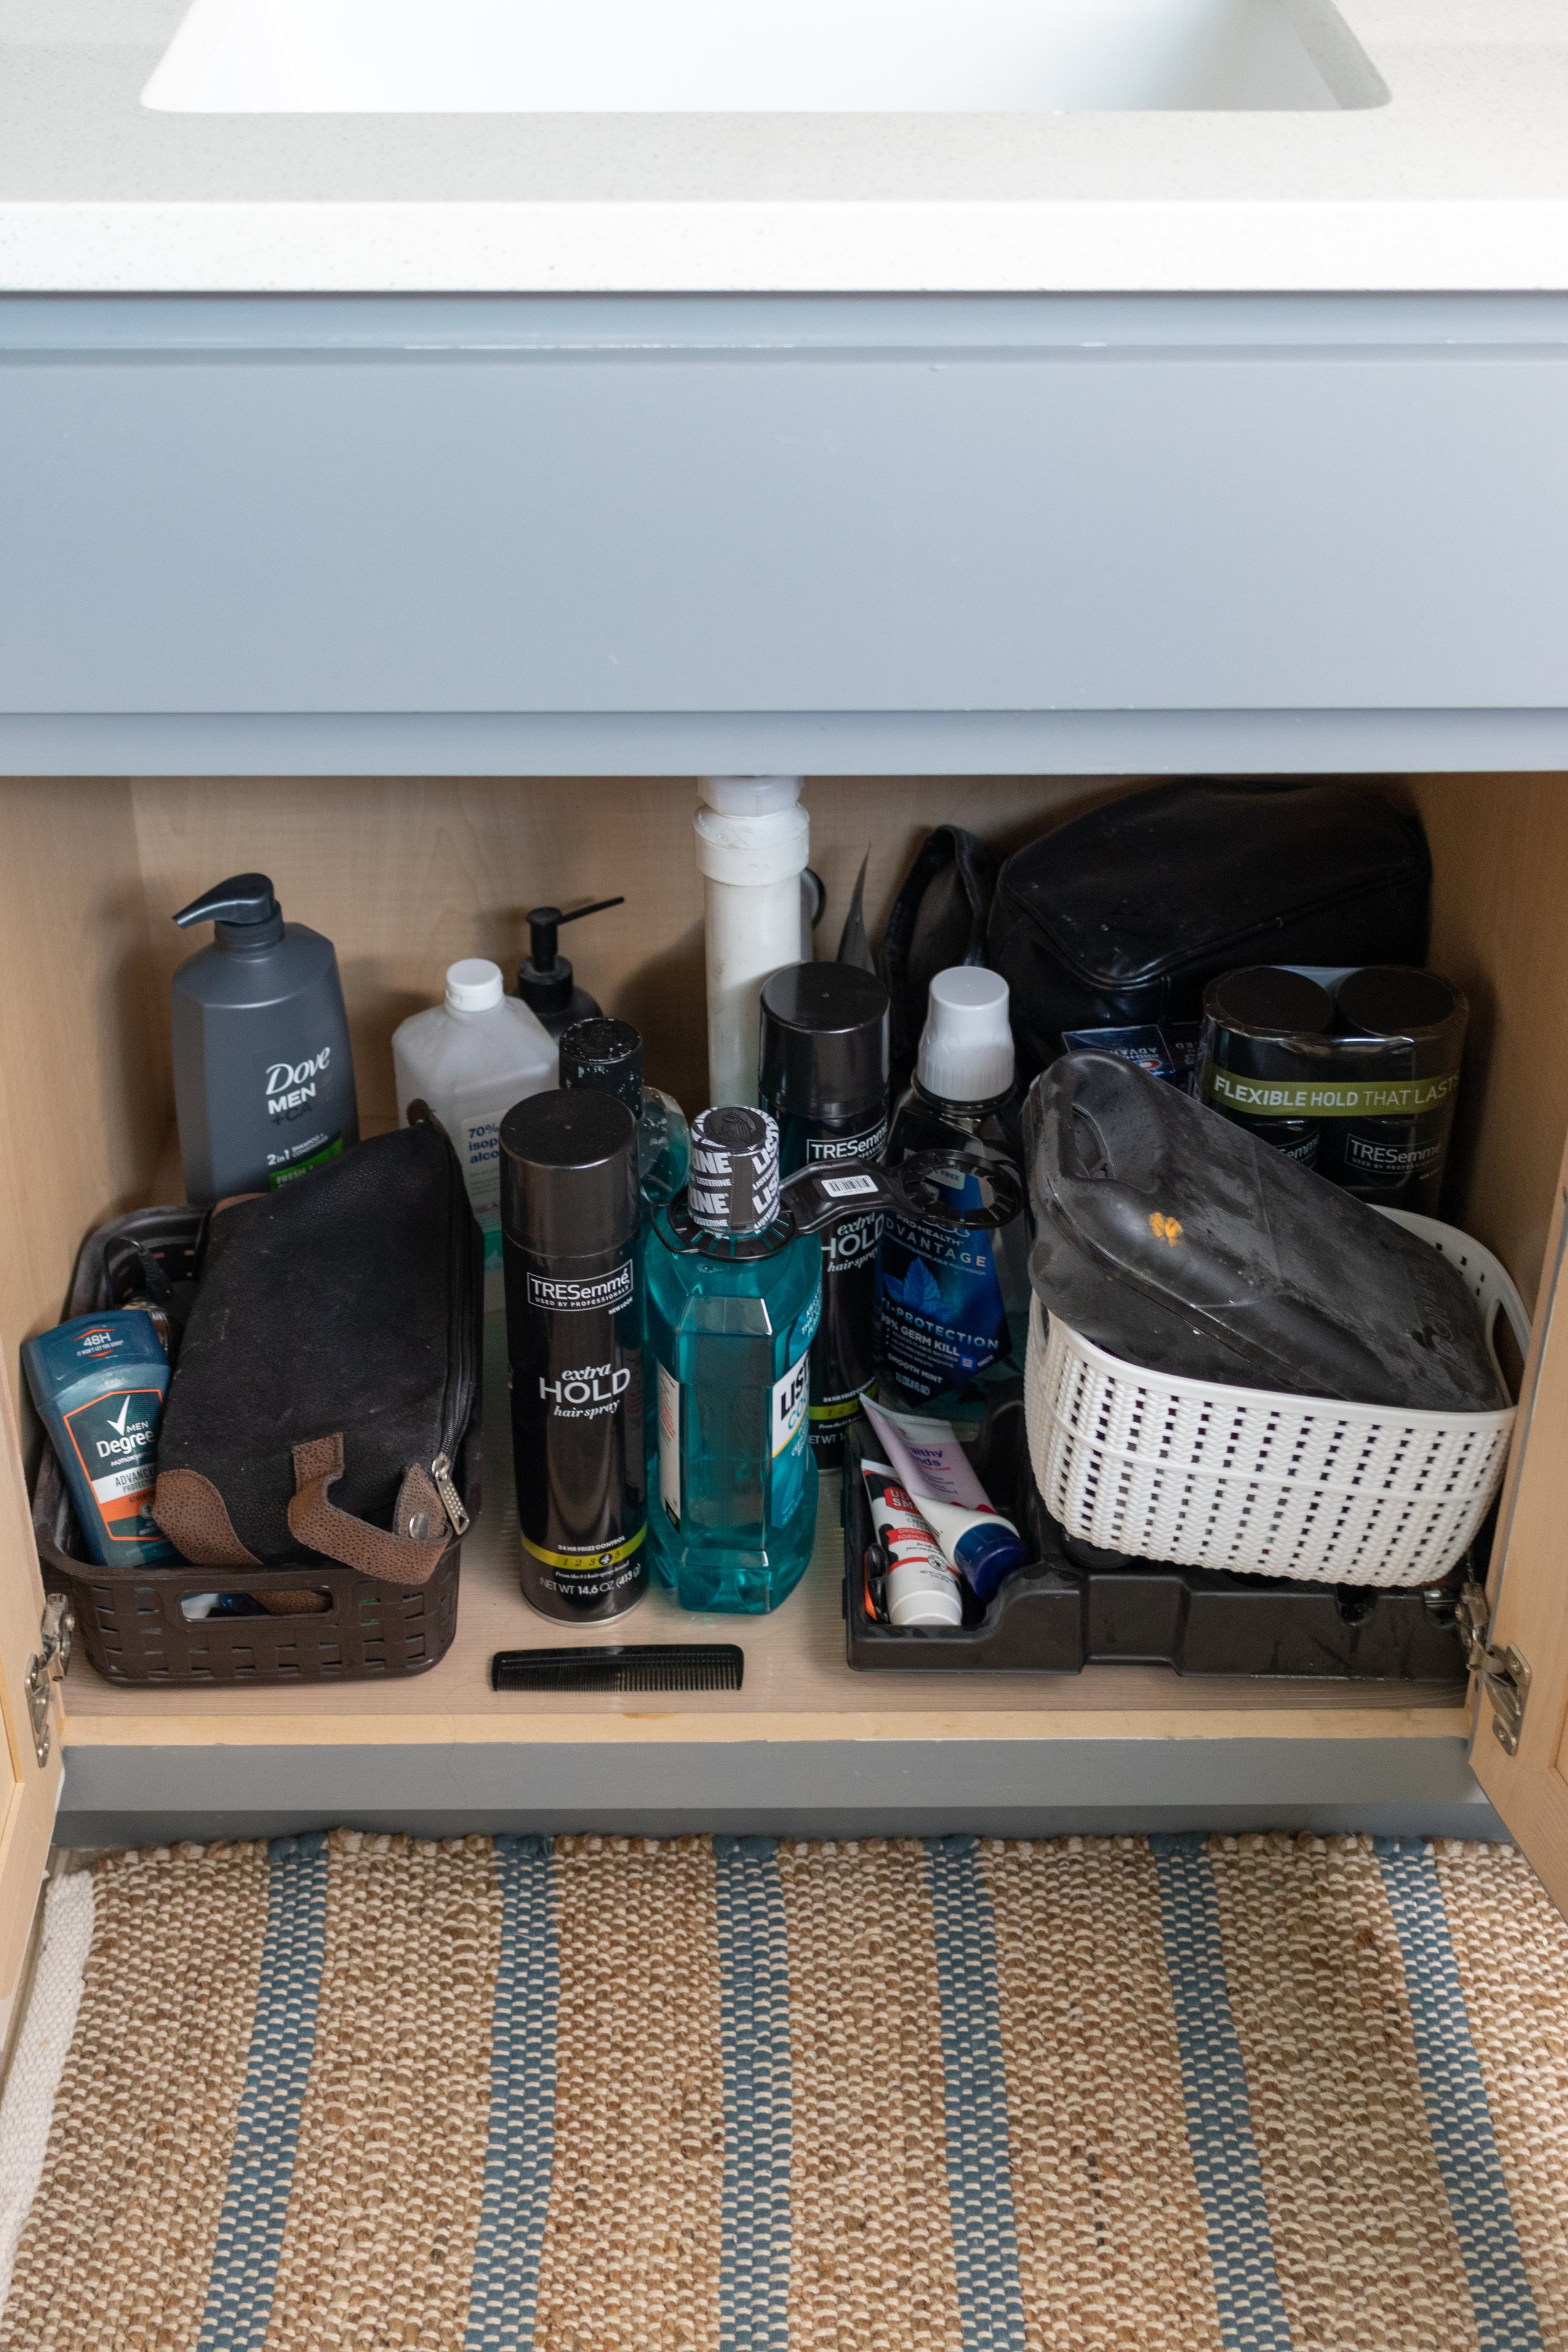 Bathroom Storage Solutions and Organization — Home with Marika